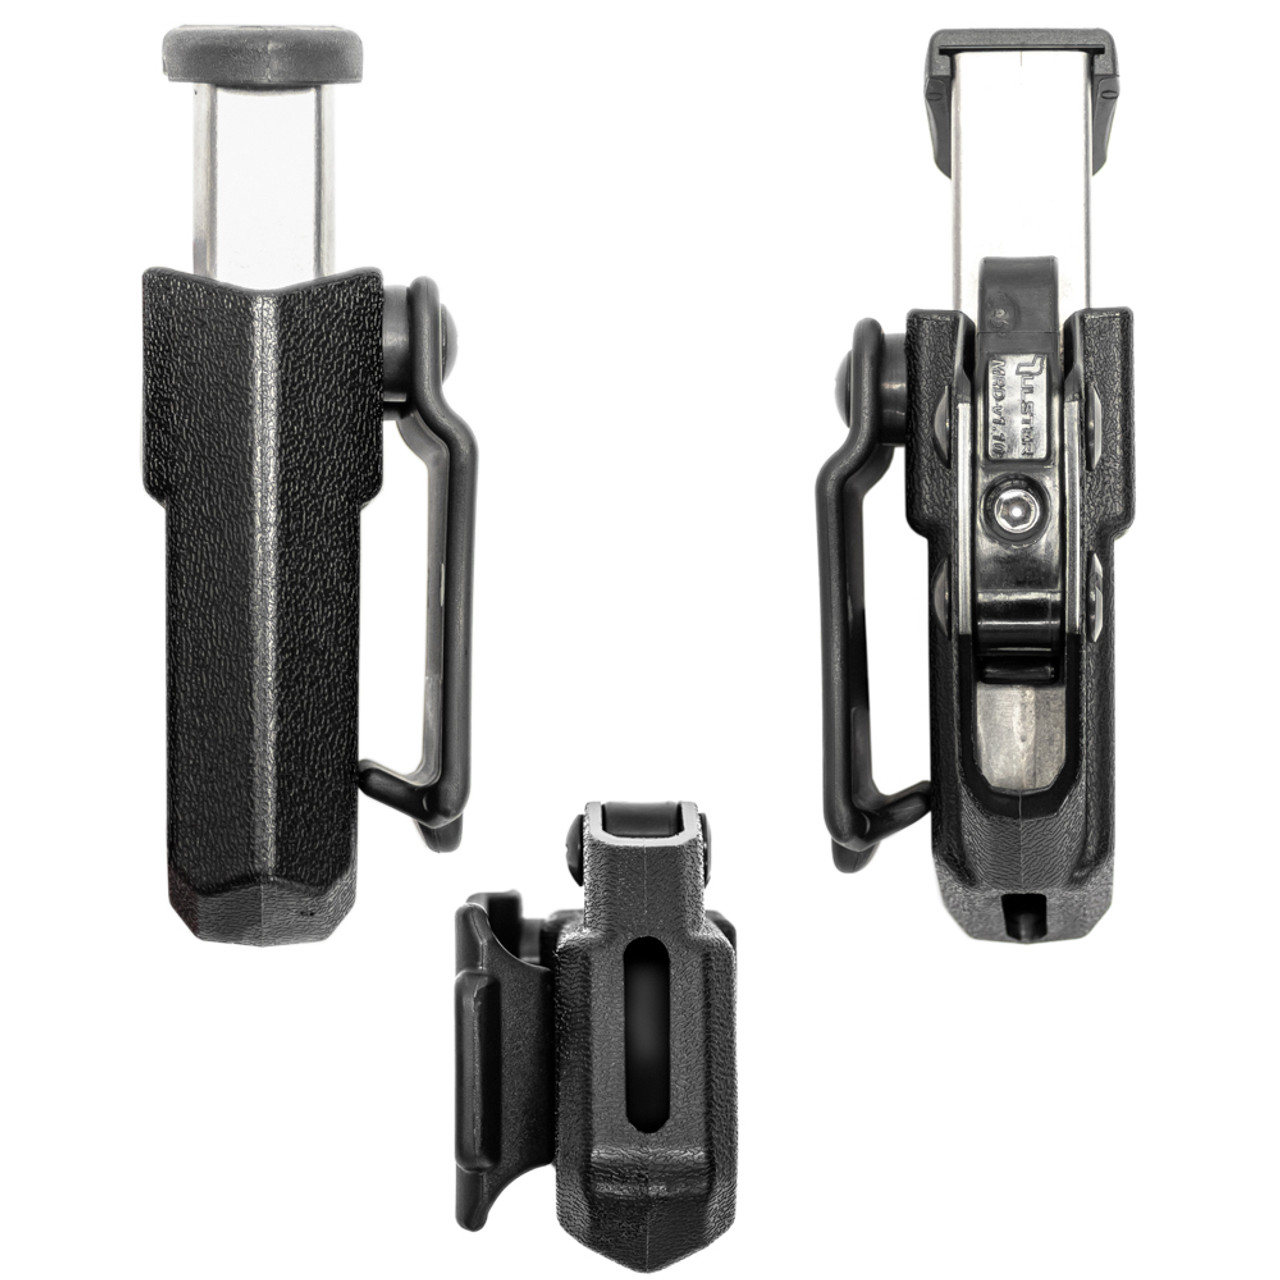 Echo Ambidextrous Mag Carrier for: Universal 9/40 Single Stack